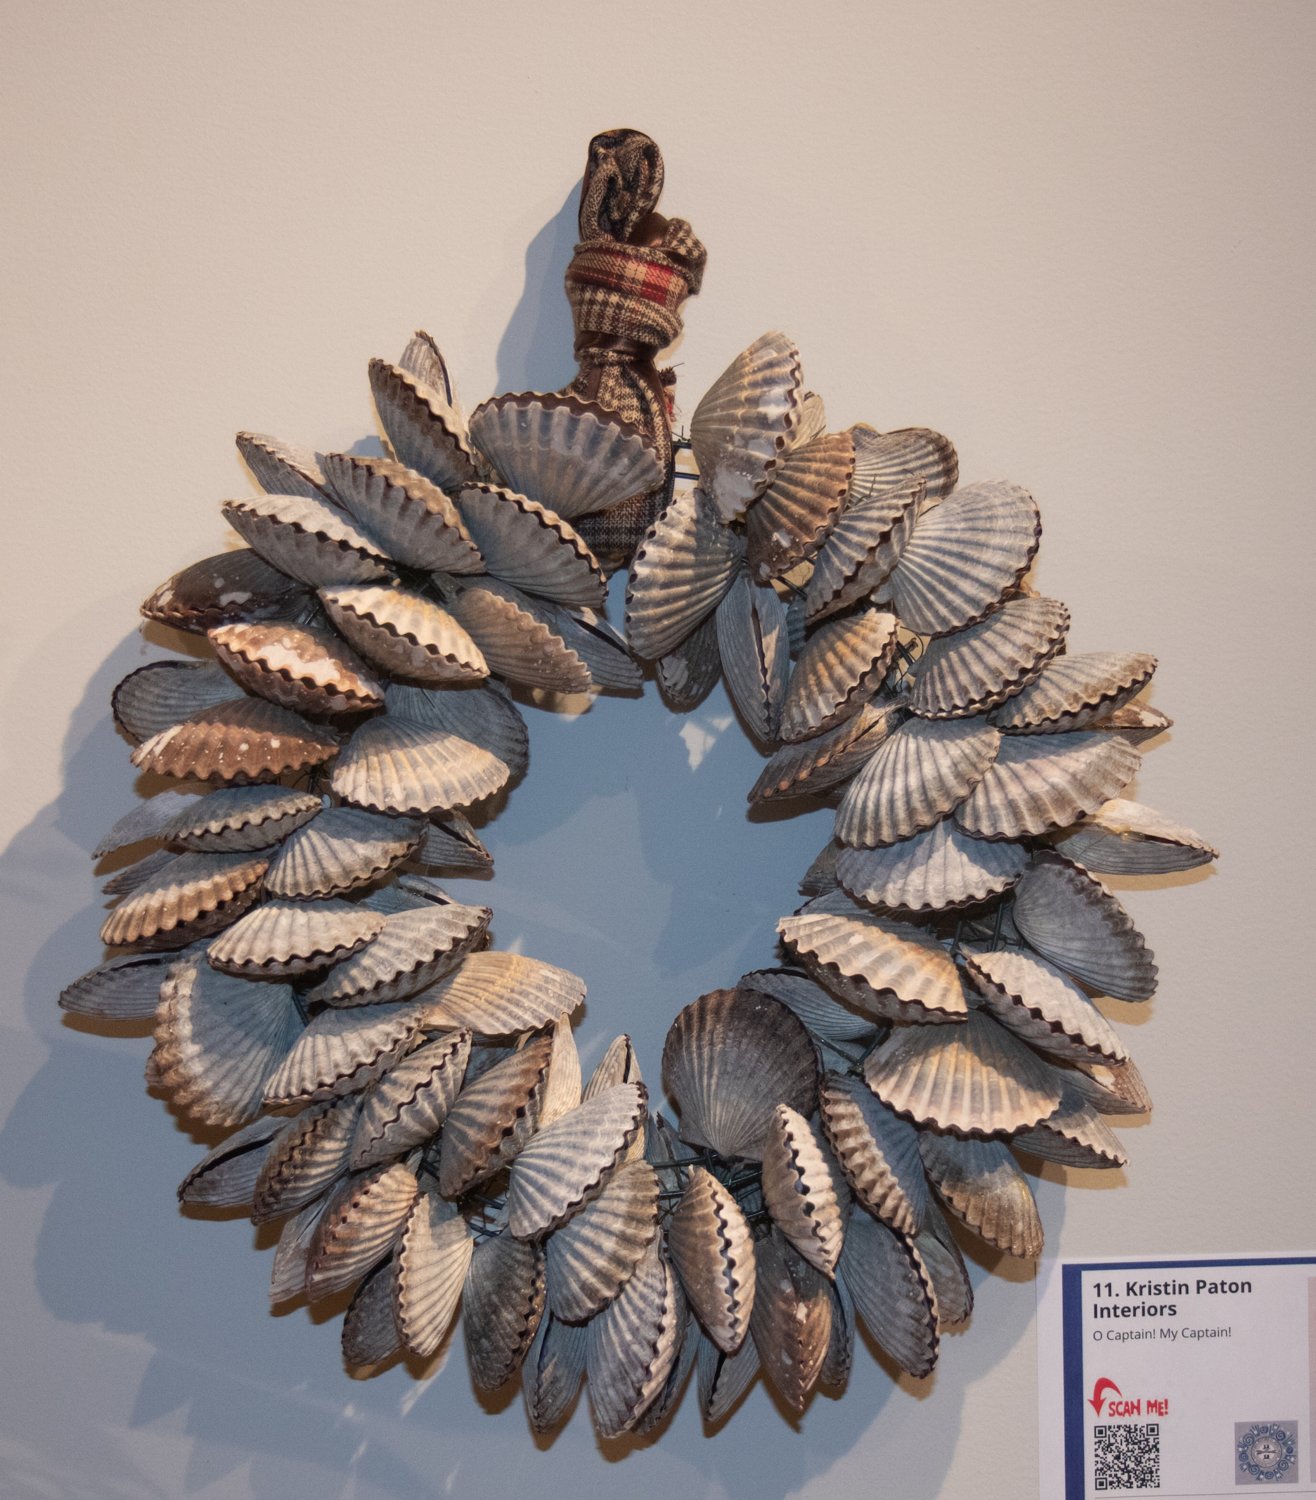 A wreath by Kristin Paton Interiors up for auction in the Nantucket Historical Association's annual Festival of Wreaths at the whaling museum.